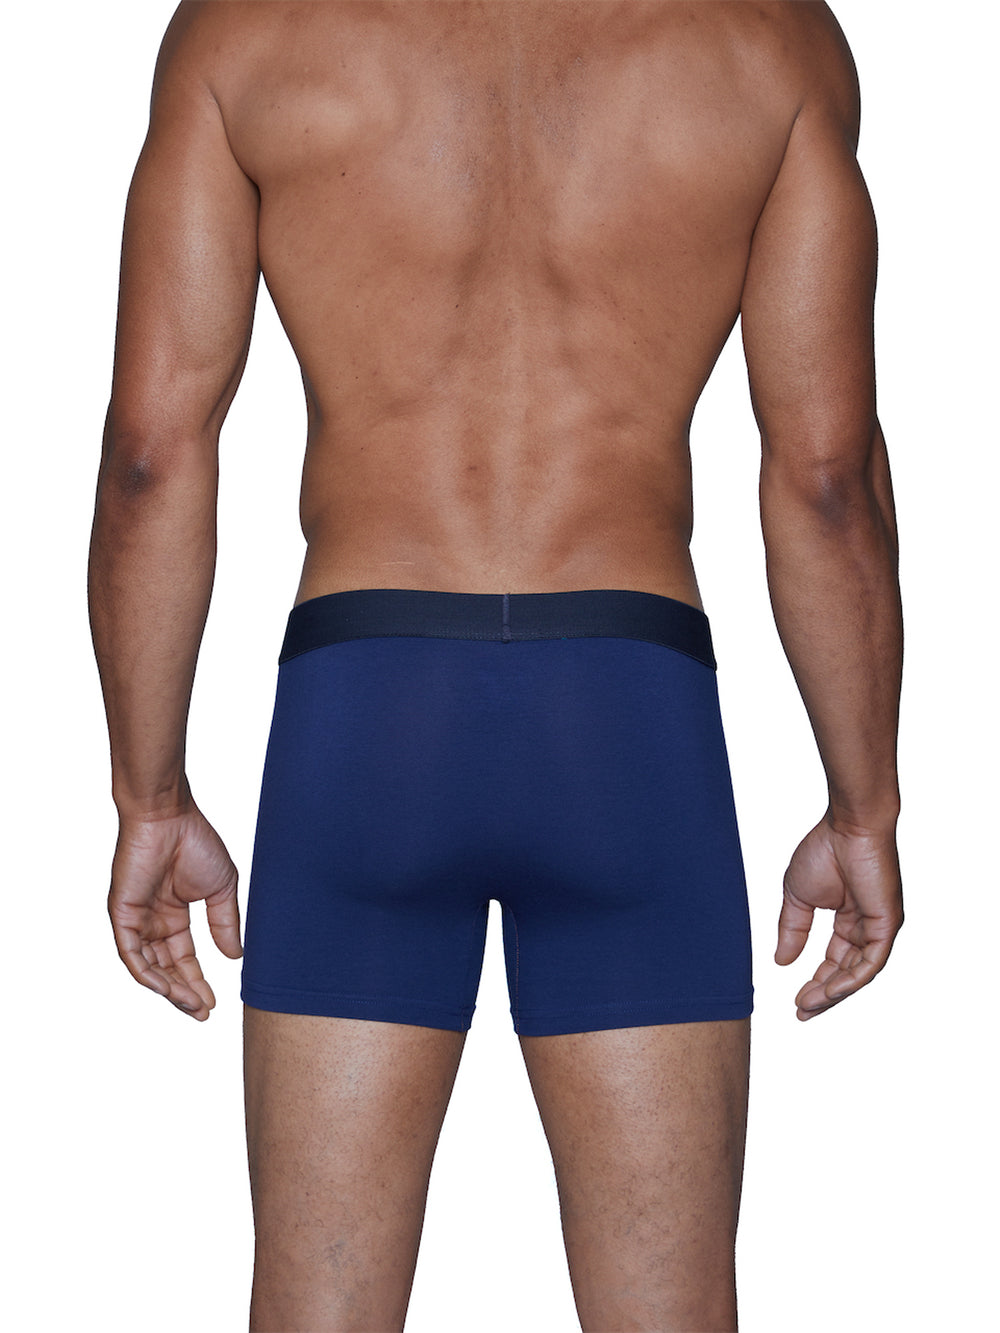 WOOD UNDERWEAR BOXER BRIEF WITH FLY - NAVY - CLEARANCE